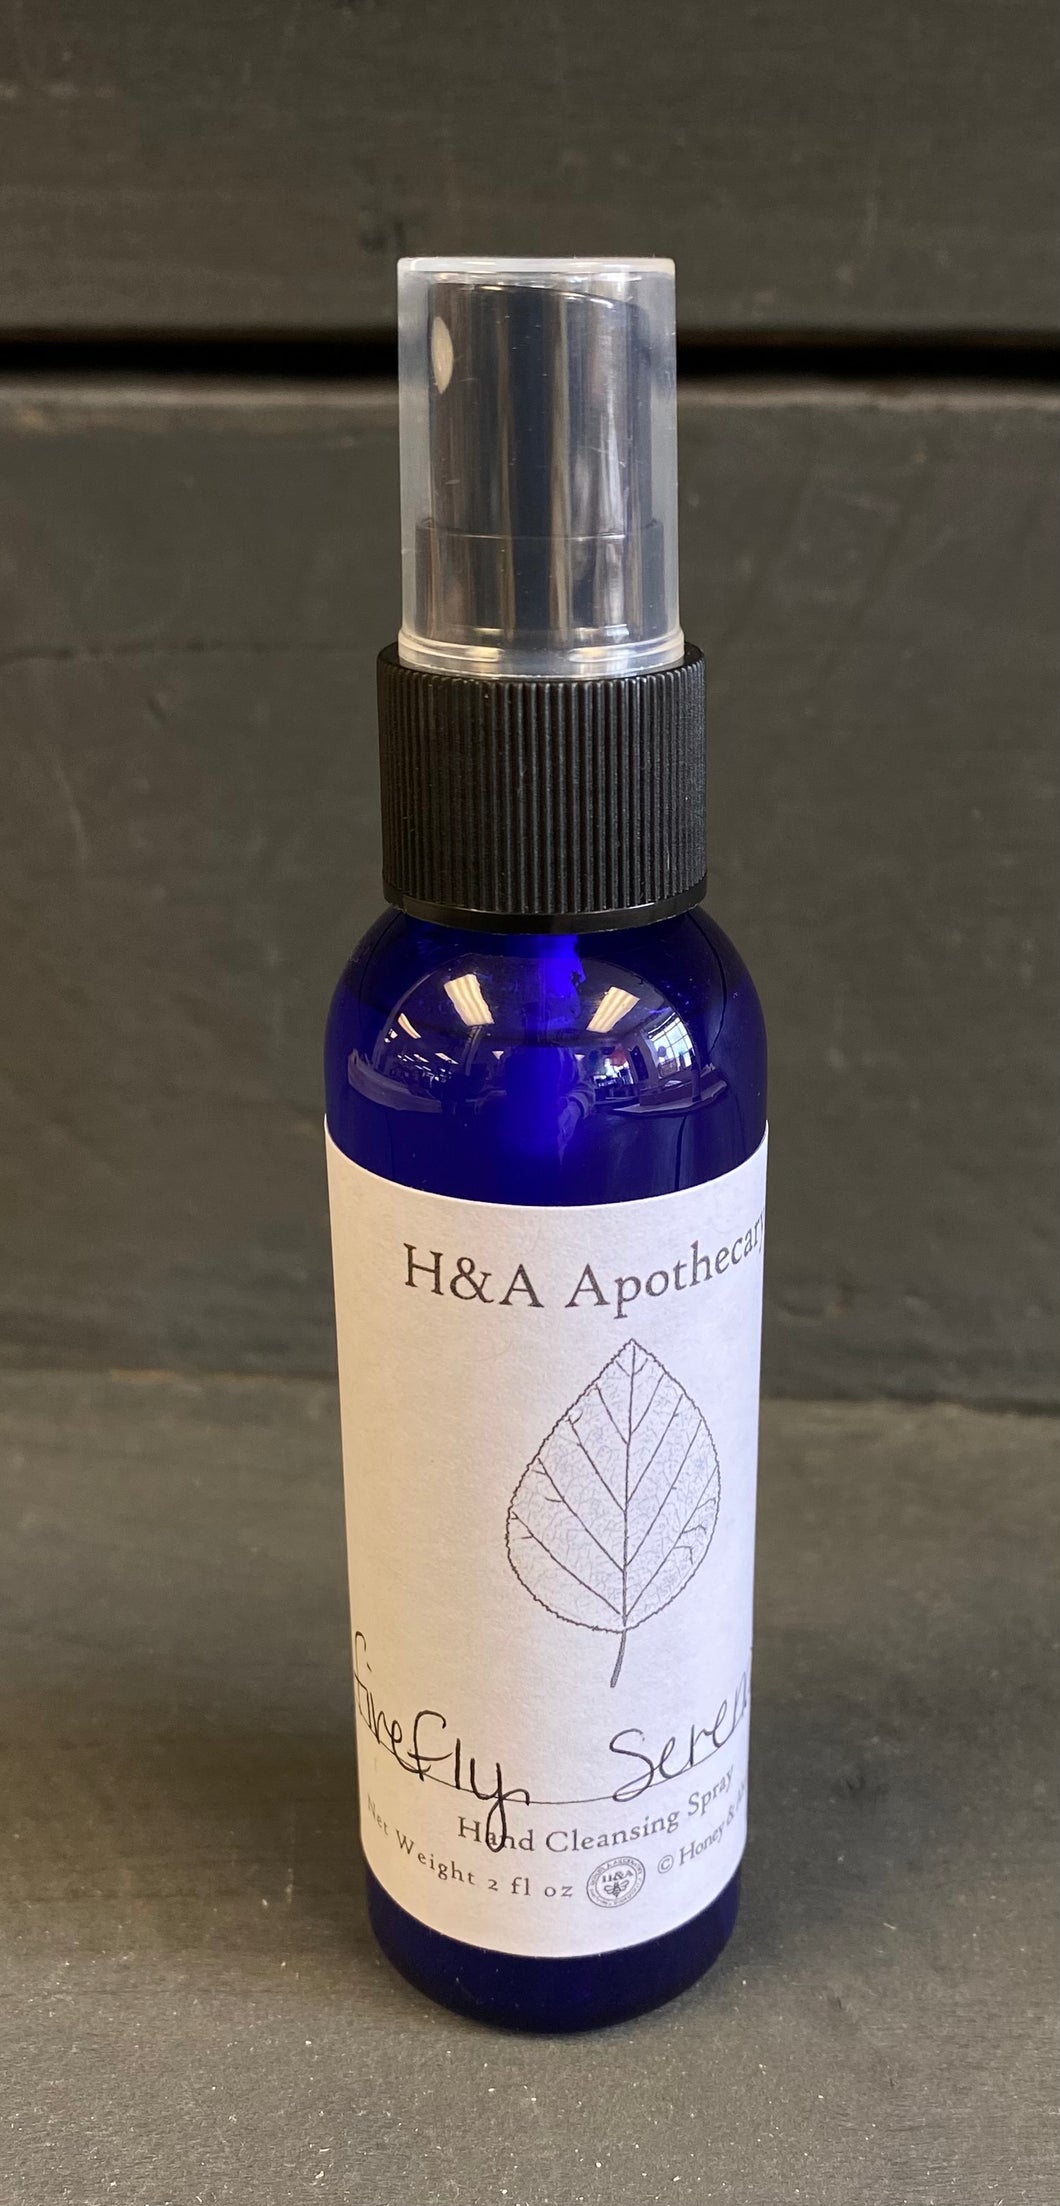 H&A Apothecary Firefly Serenade Hand Cleansing Spray